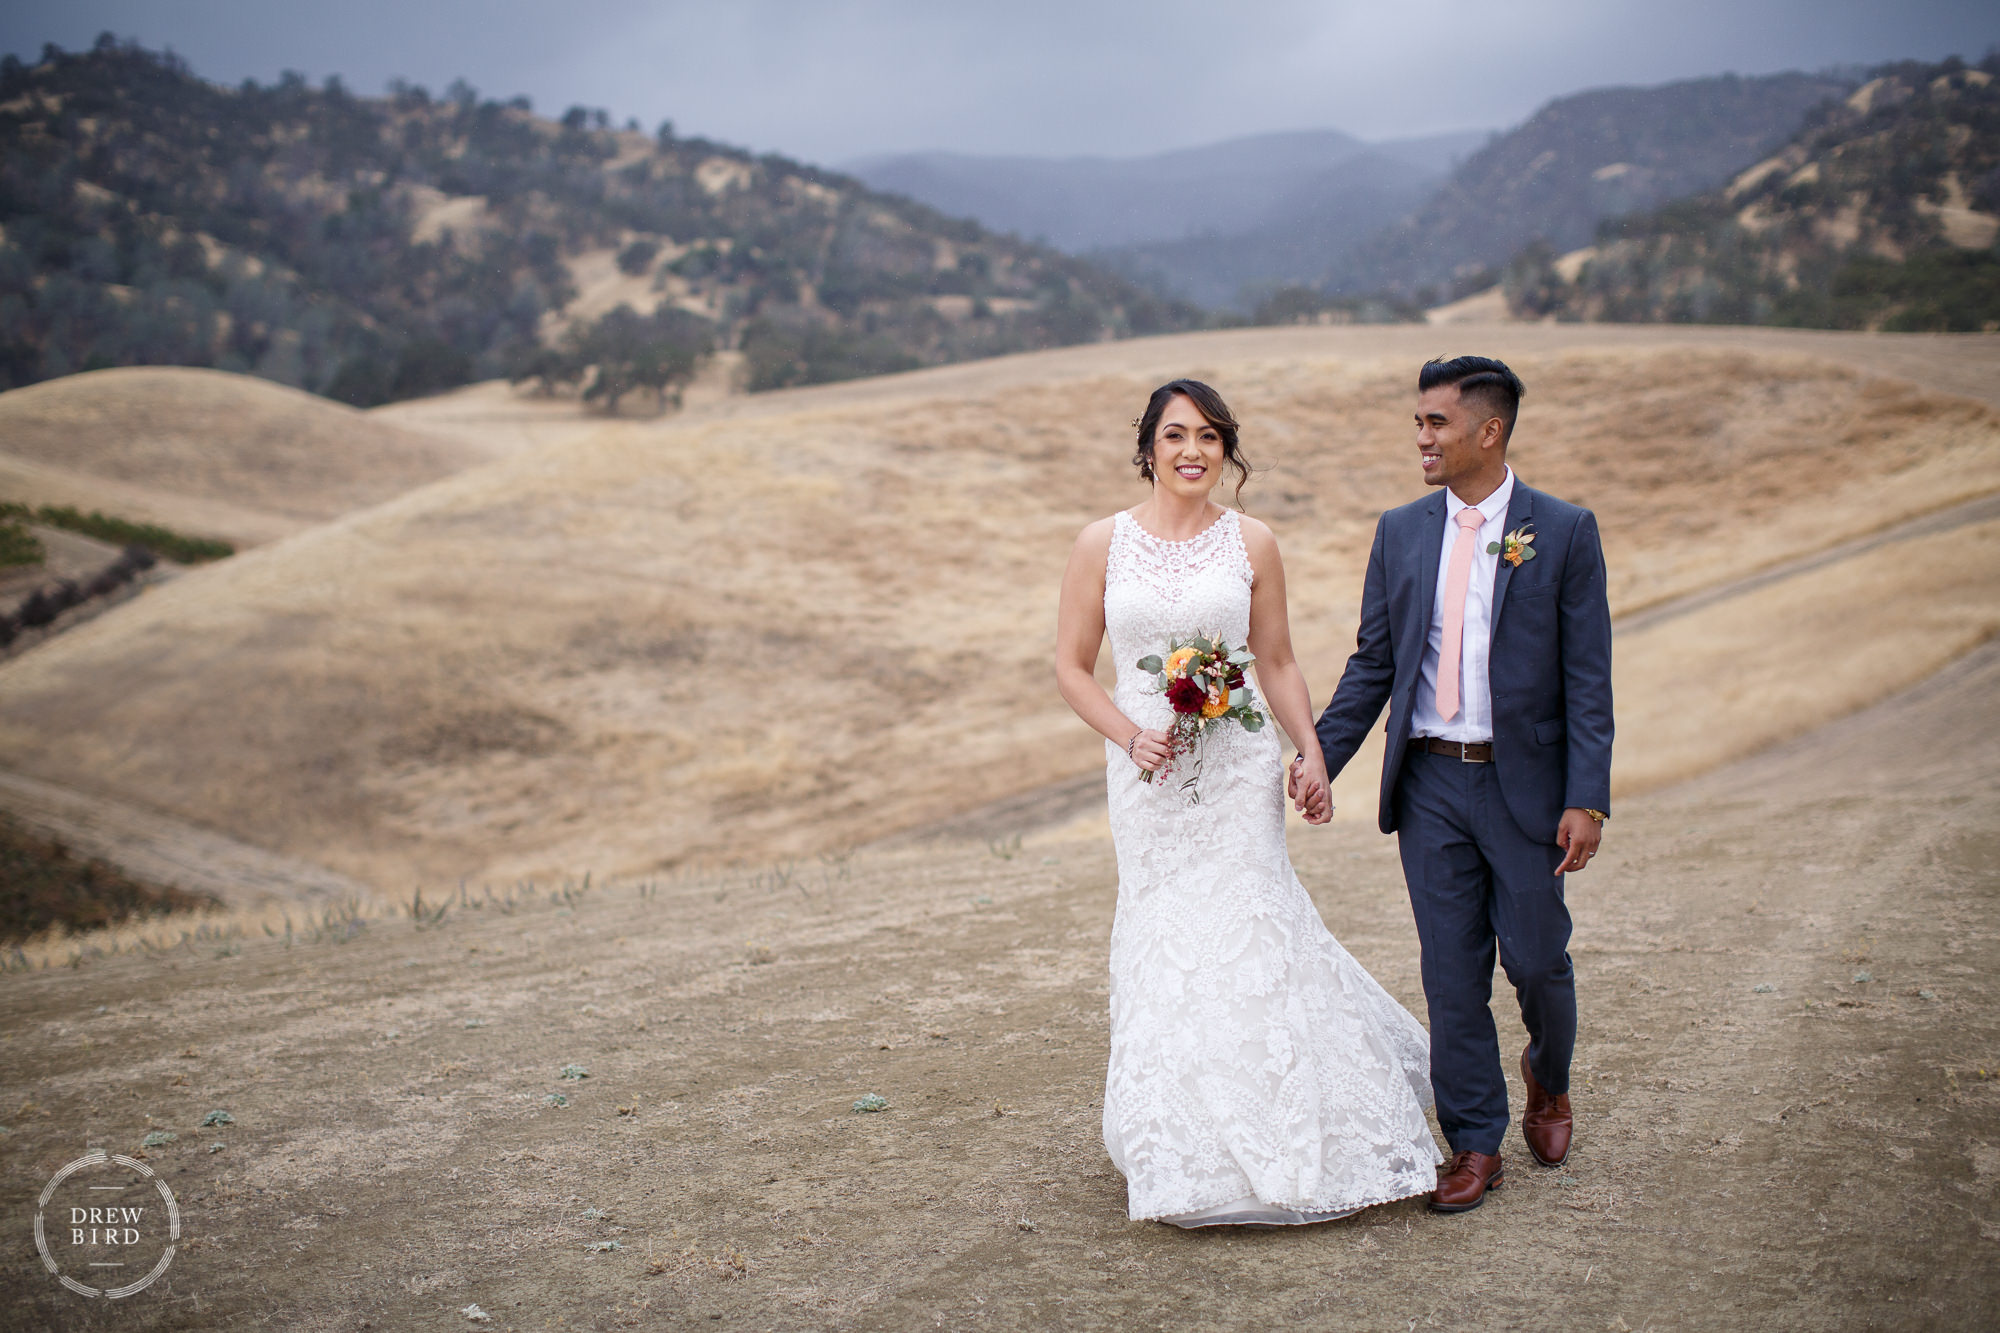 Bride and groom holding hands walking in rolling hills meadow. Taber Ranch wedding photography in Capay Valley, California.